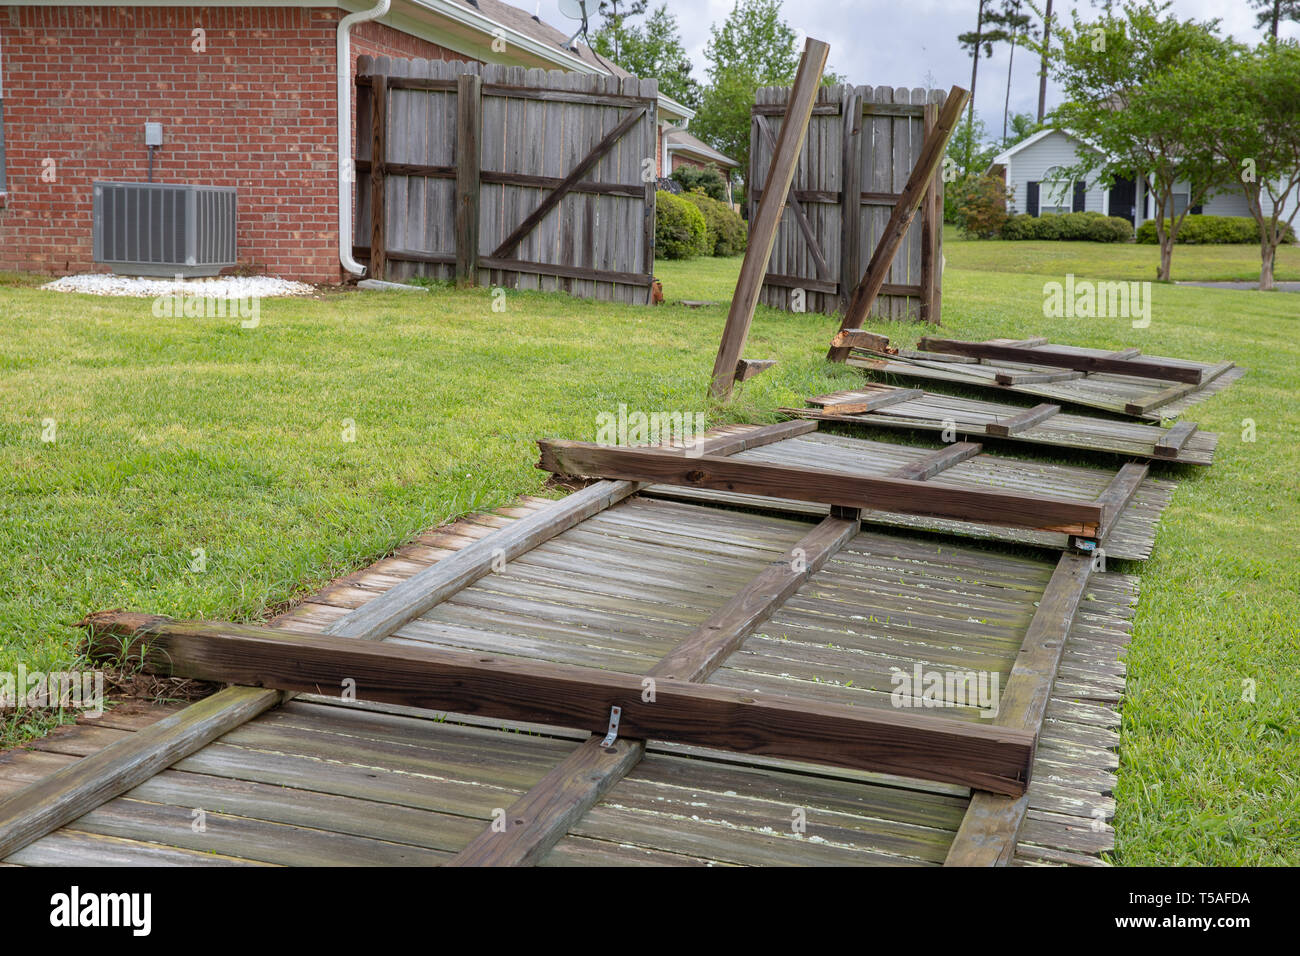 Fence damaged and blown down during severe weather Stock Photo